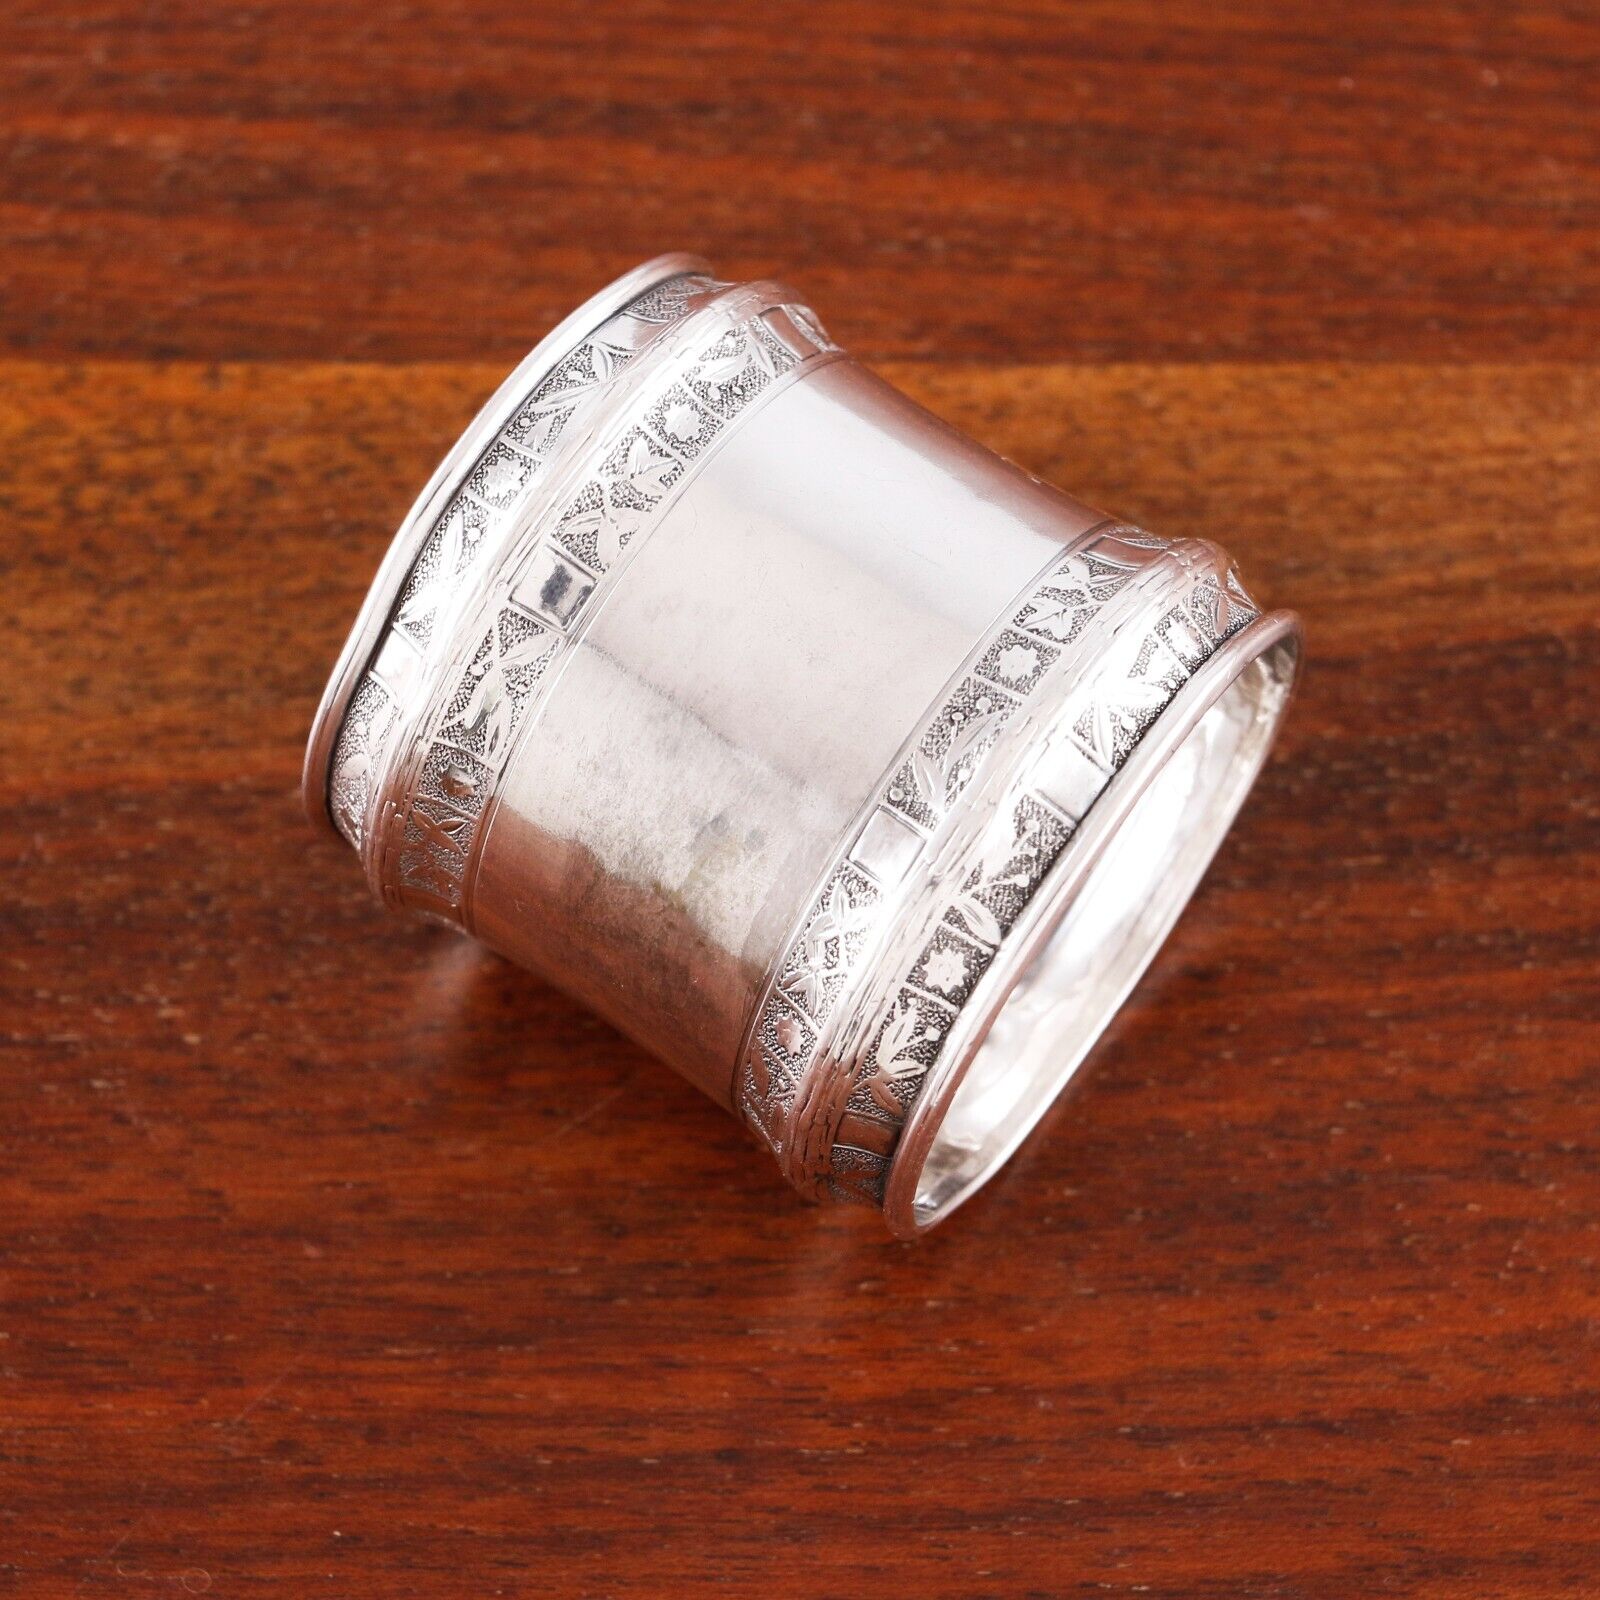 Antique Valuations: GORHAM AESTHETIC STERLING SILVER NAPKIN RING DOUBLE BANDED RIMS BOTANICALS